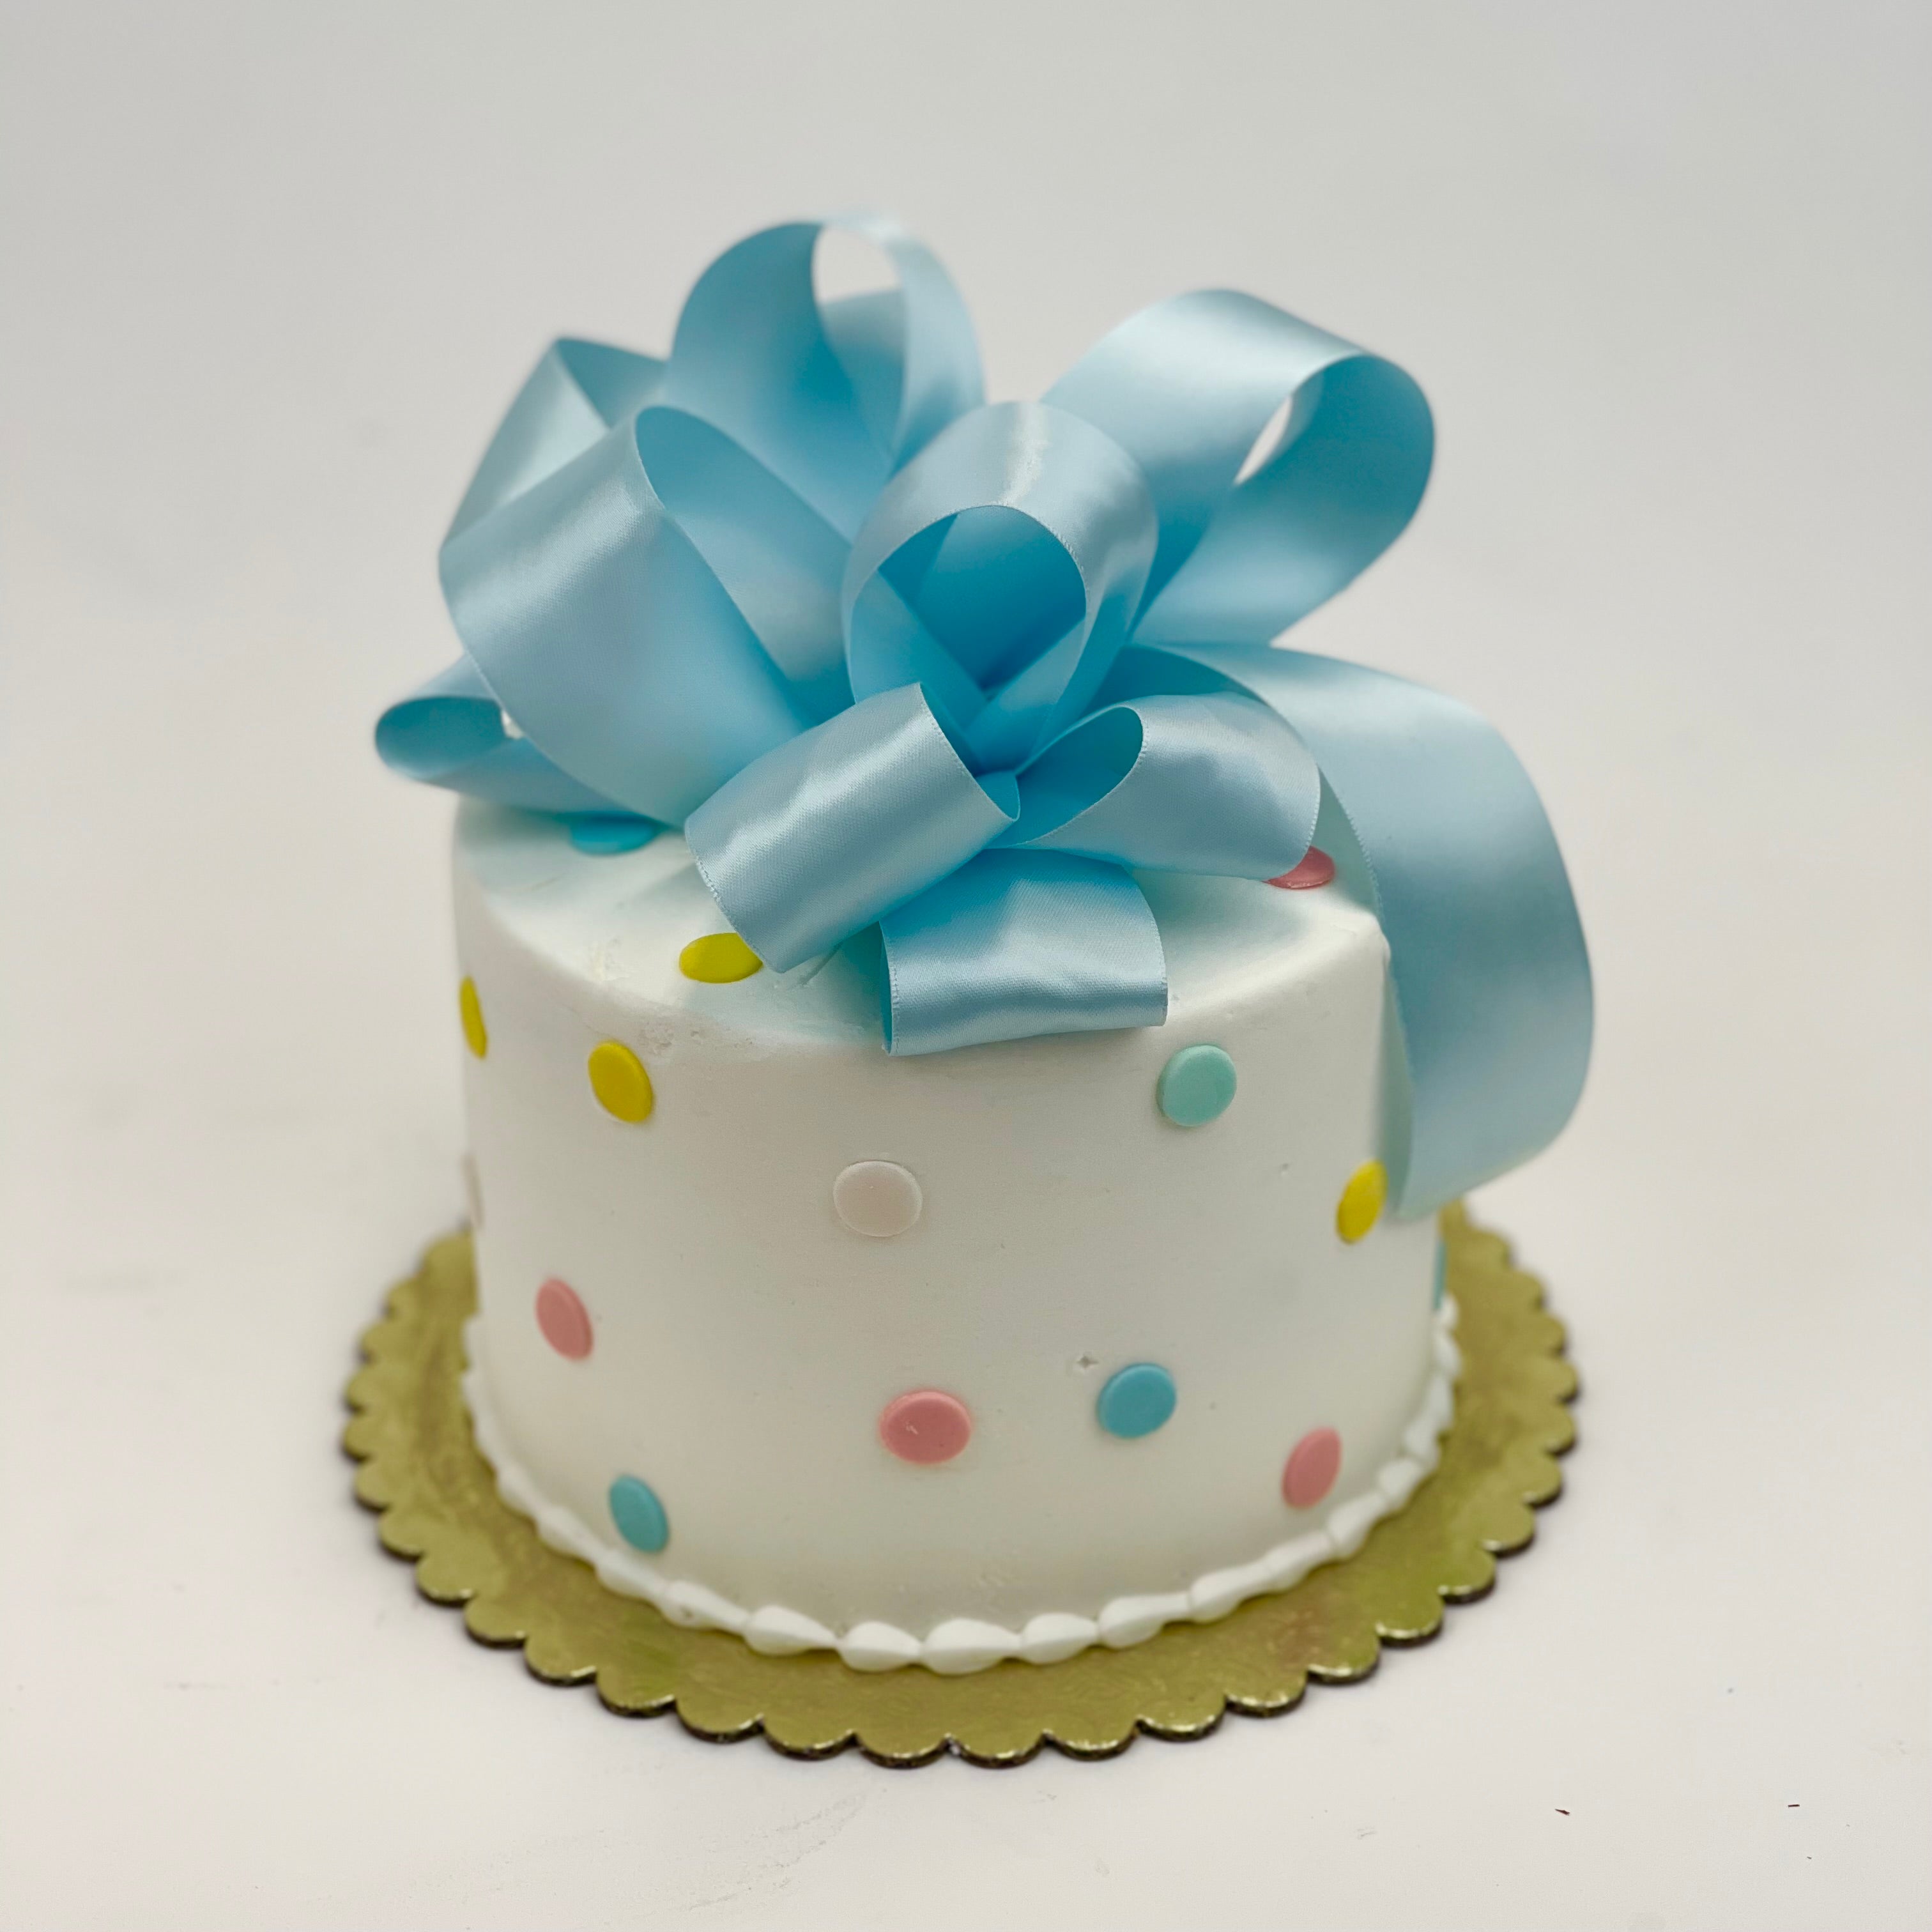 Yellow And Blue Polka Dots On White Cake